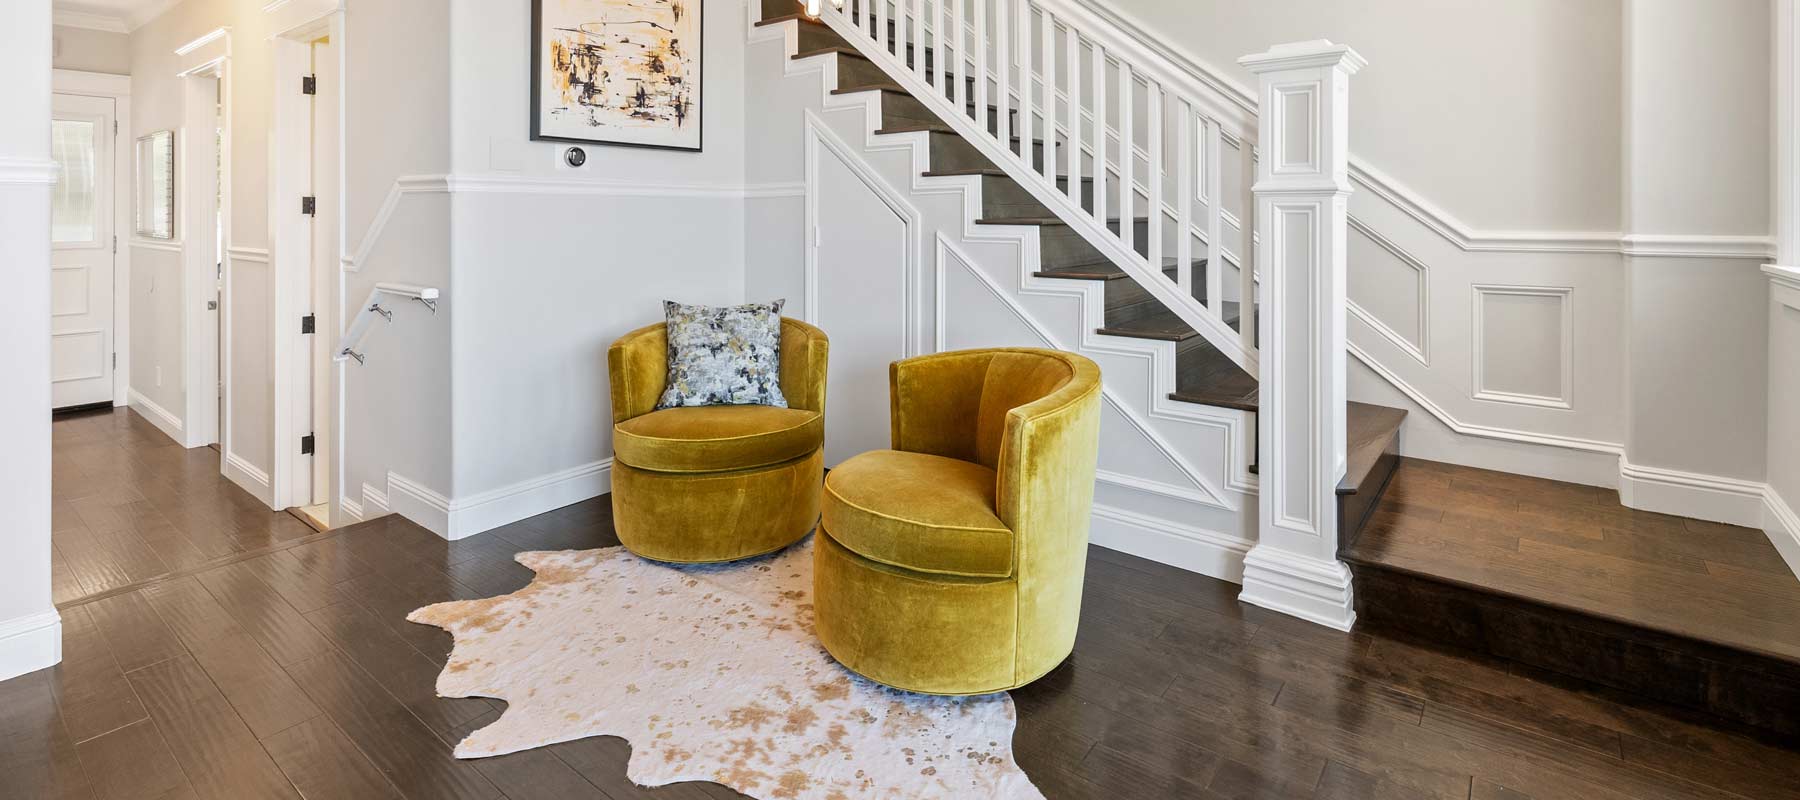 two yellow chairs in a home's entryway